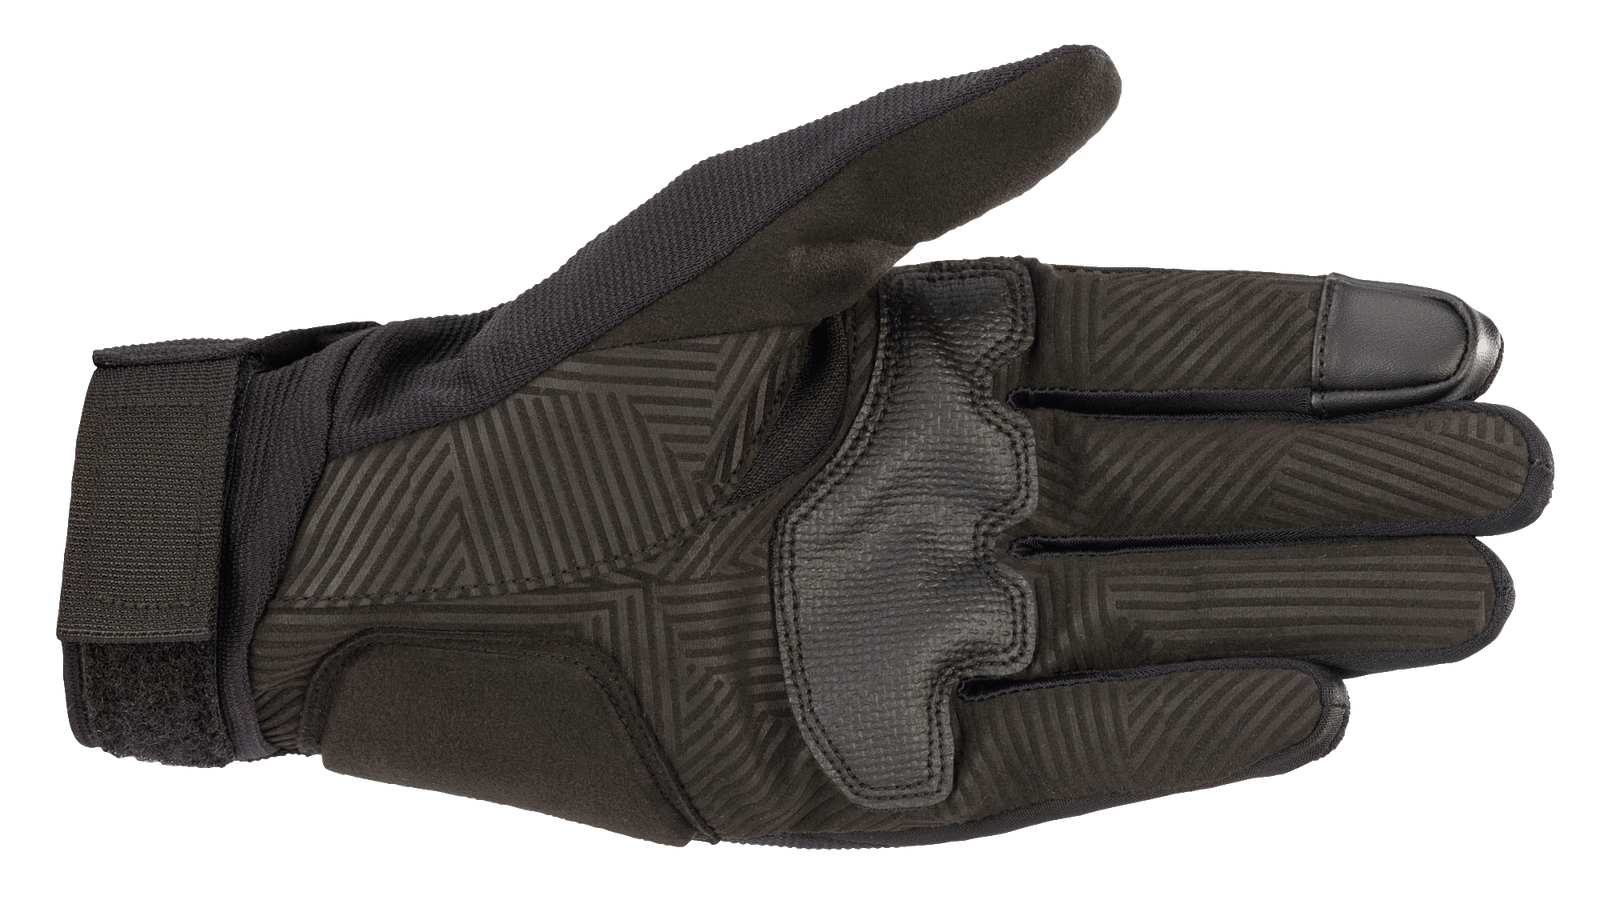 The Reef Gloves from Alpinestars EU are black and feature the Alpinestars logo and branding in white on the backhand. Designed for motorsport or outdoor activities, these gloves have a sleek design, stretch fabric for flexibility, and reinforced stitching.